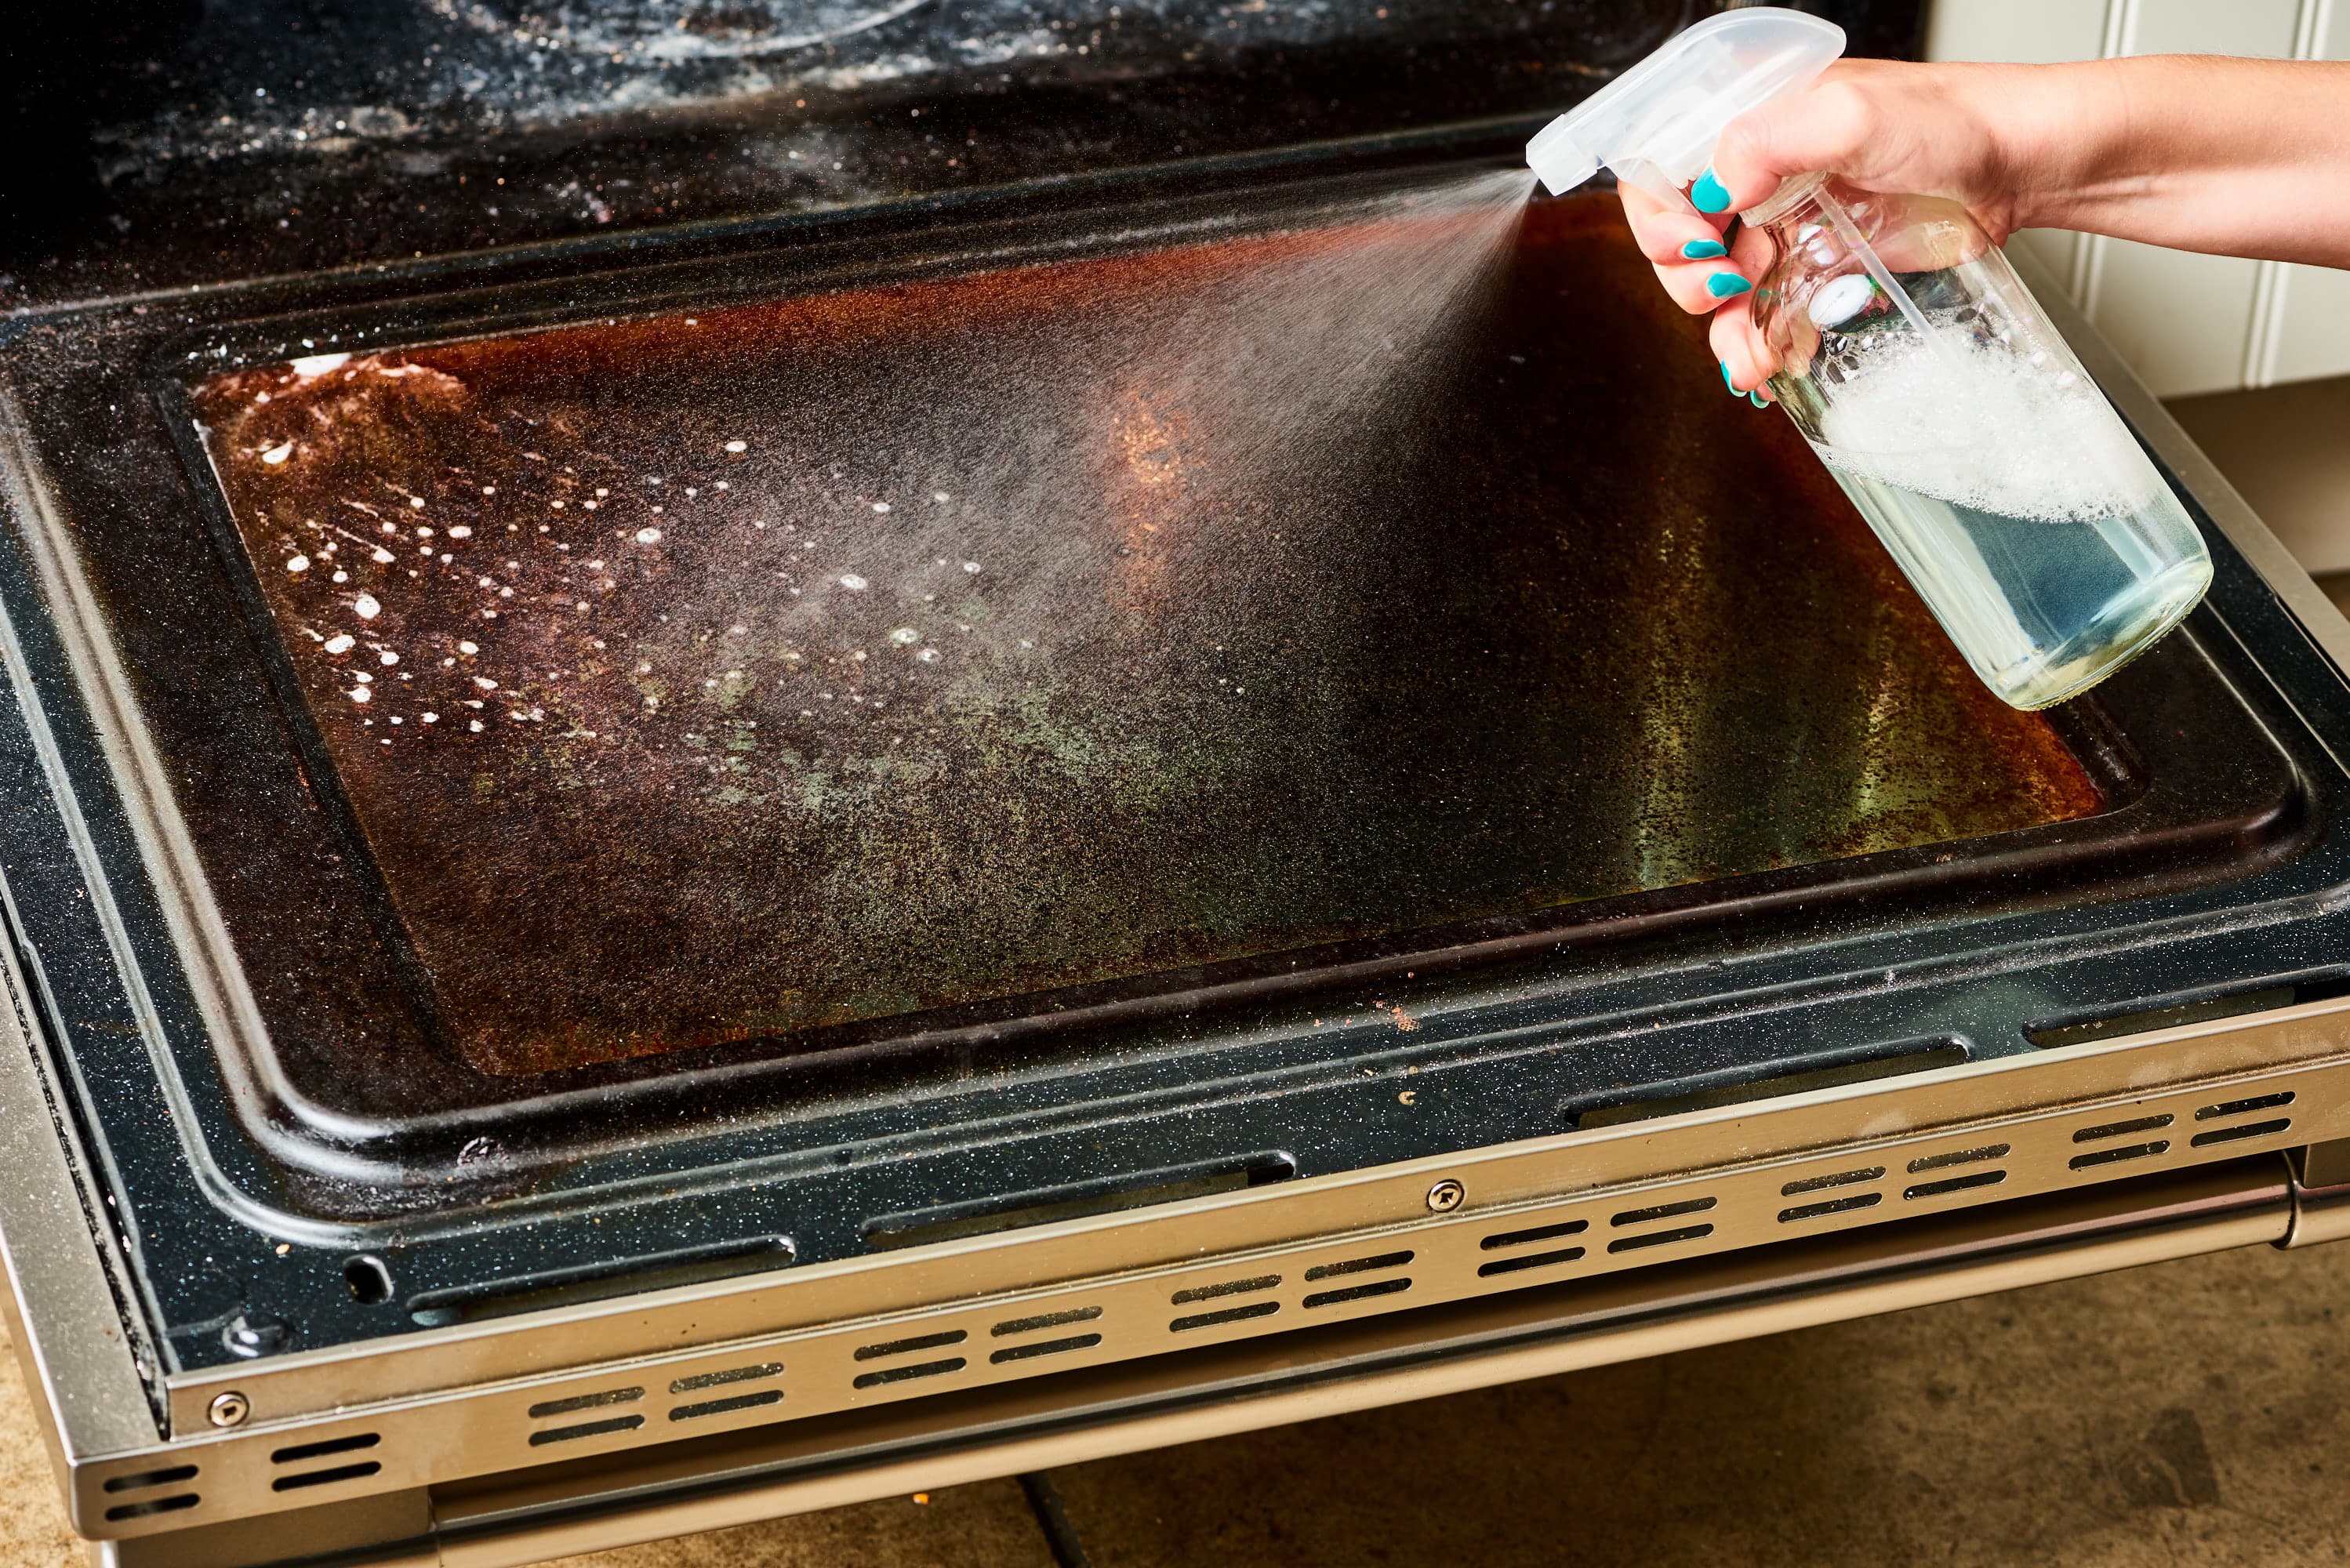 Can You Clean an Oven with Bleach?